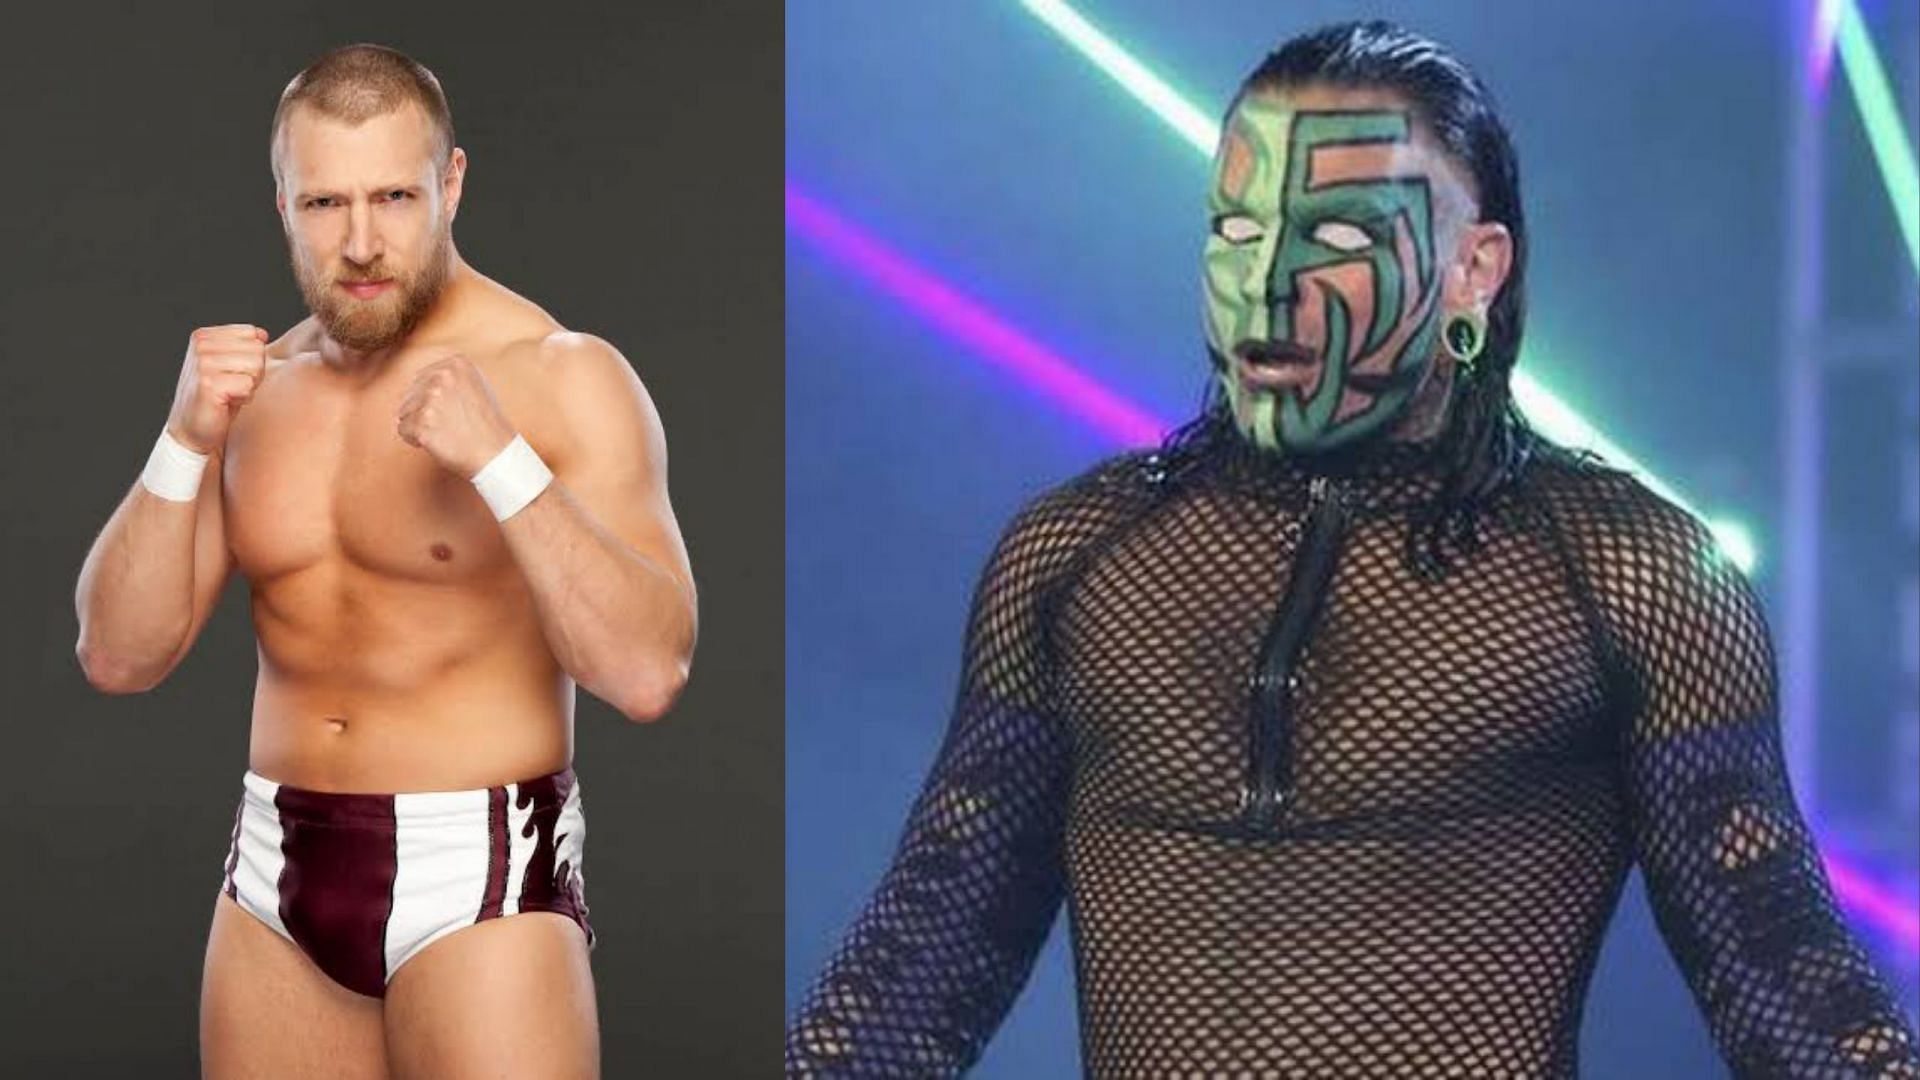 Daniel Bryan and Jeff Hardy were both released at some point in their careers.